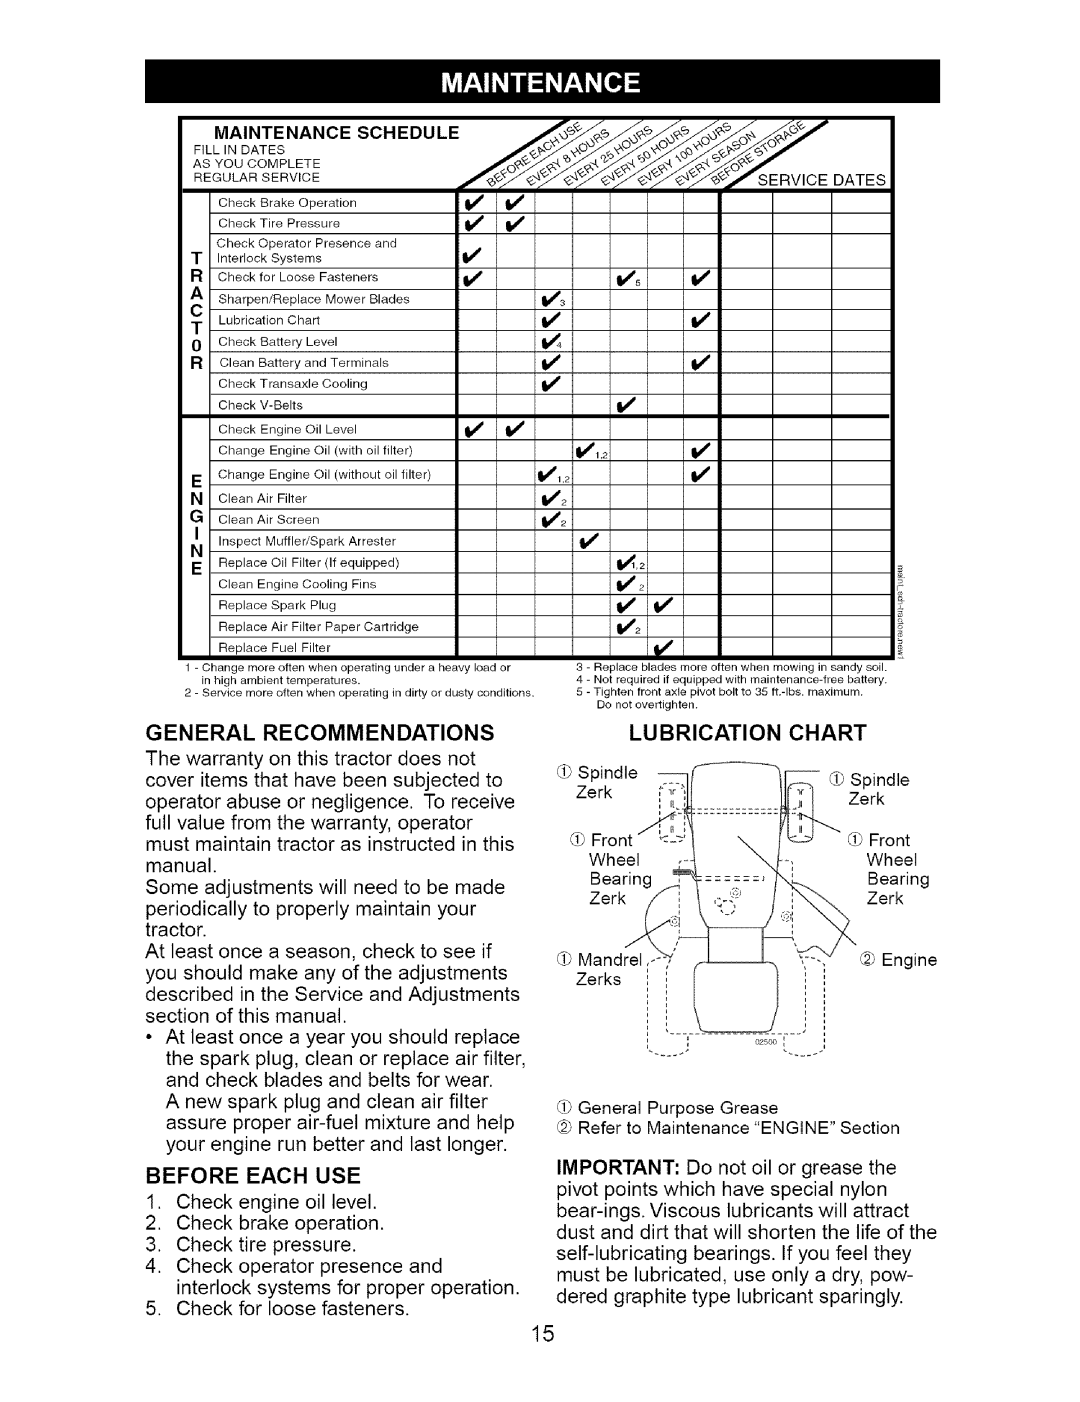 Craftsman 917.273663 owner manual Before Each Use, Lubrication Chart, General Recommendations 